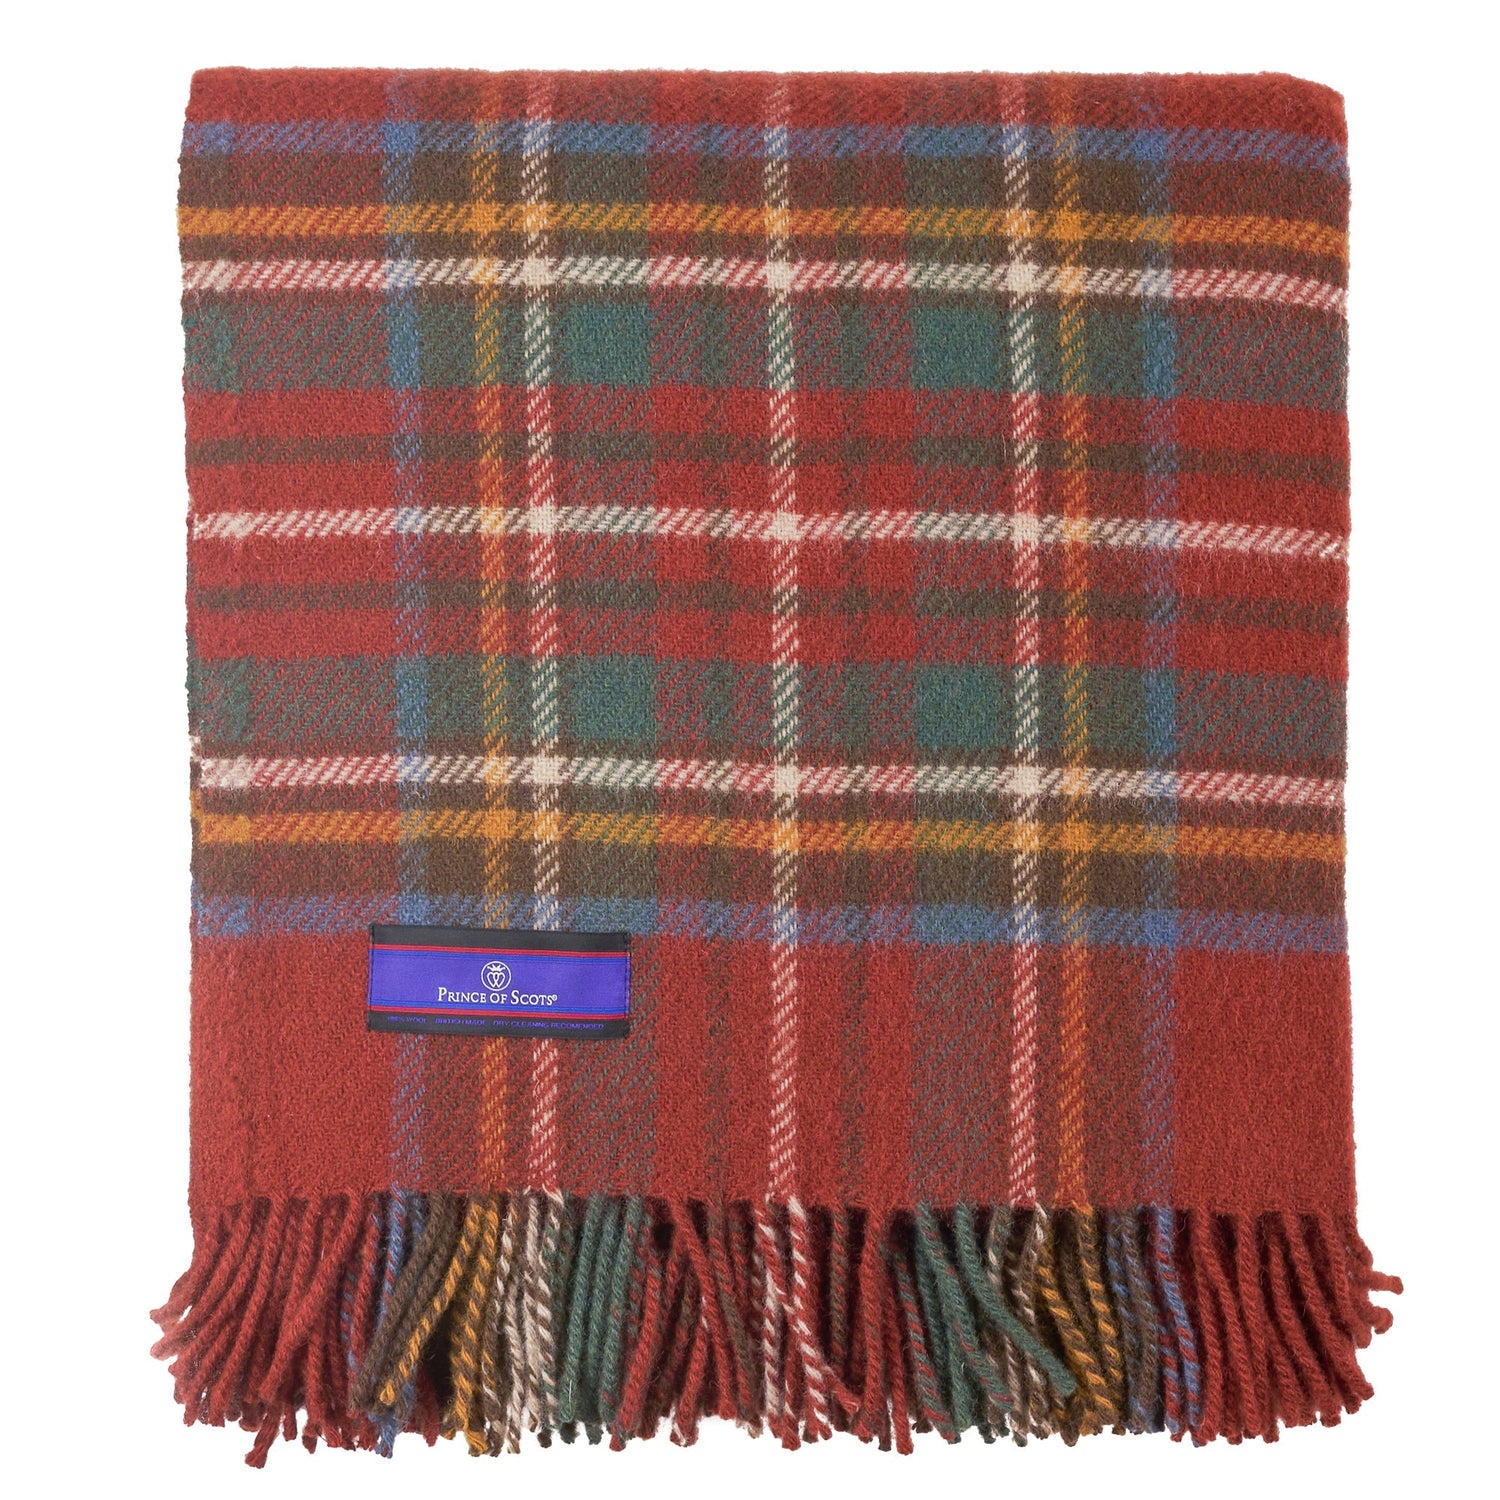 Prince of Scots Highland Tweed Pure New Wool Fluffy Throw ~ Antique Royal Stewart ~-Throws and Blankets-J4050028-21-Prince of Scots